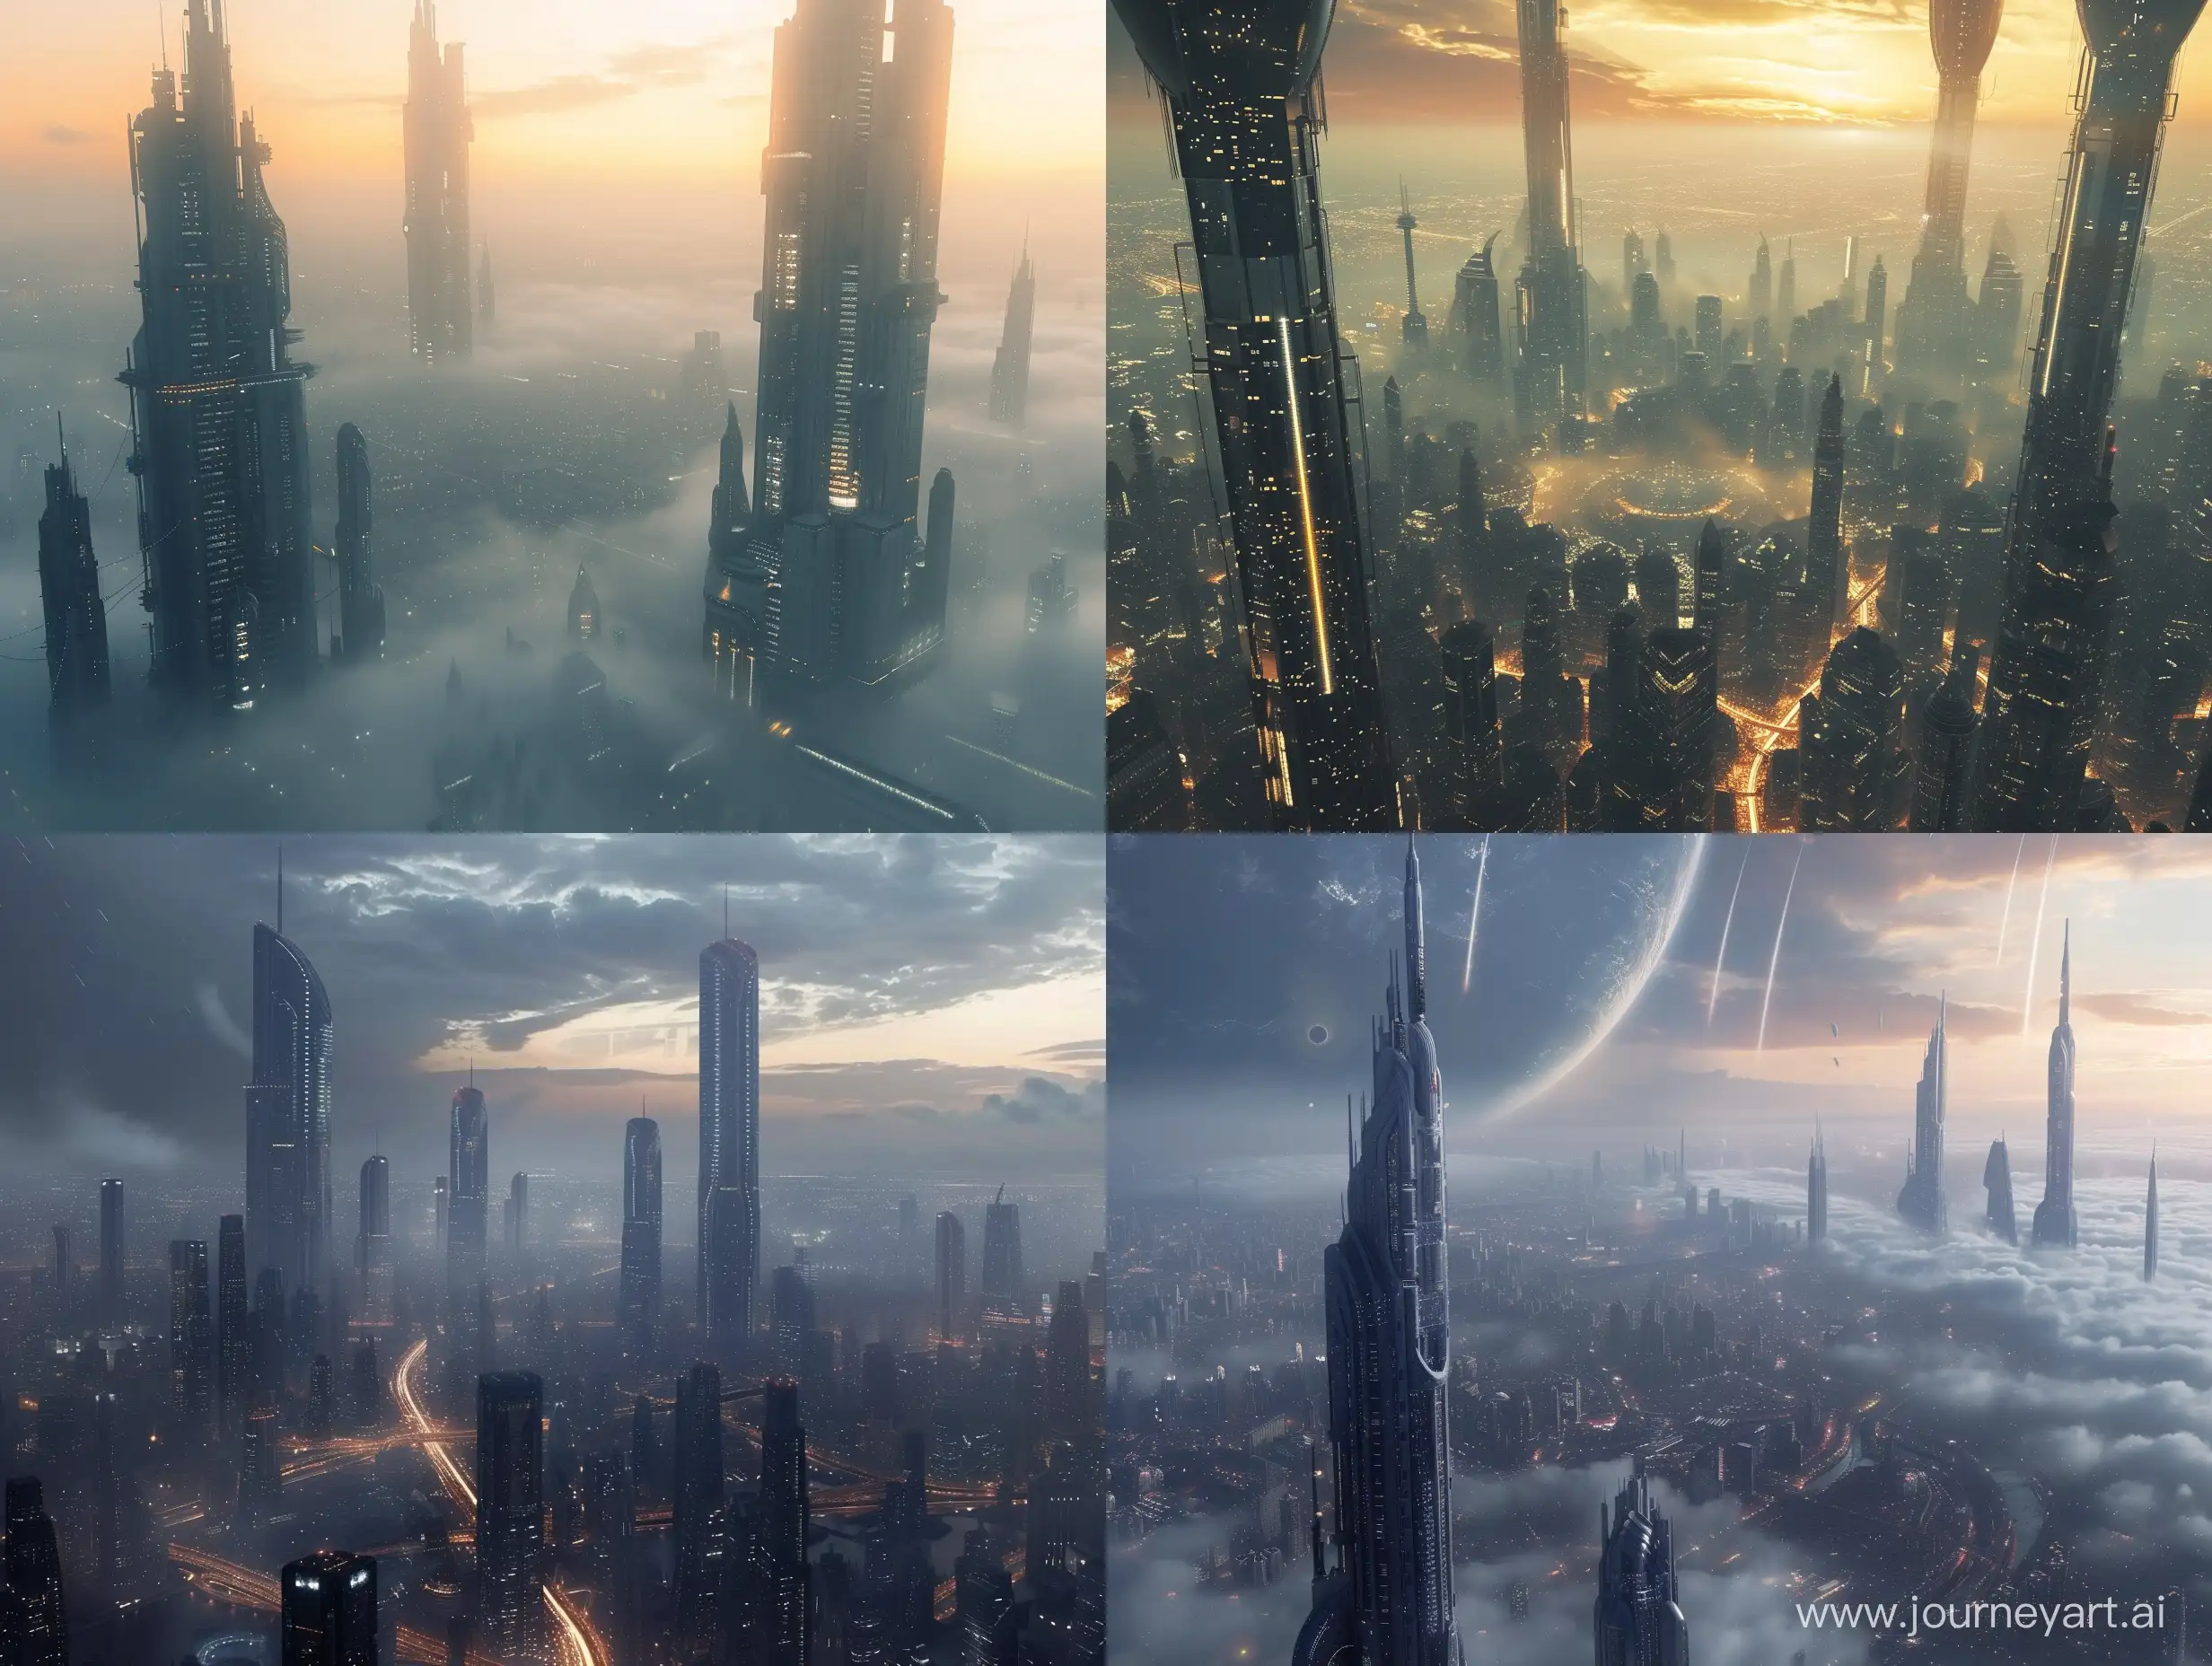 A cinematic photo of an incredible futuristic city skyline